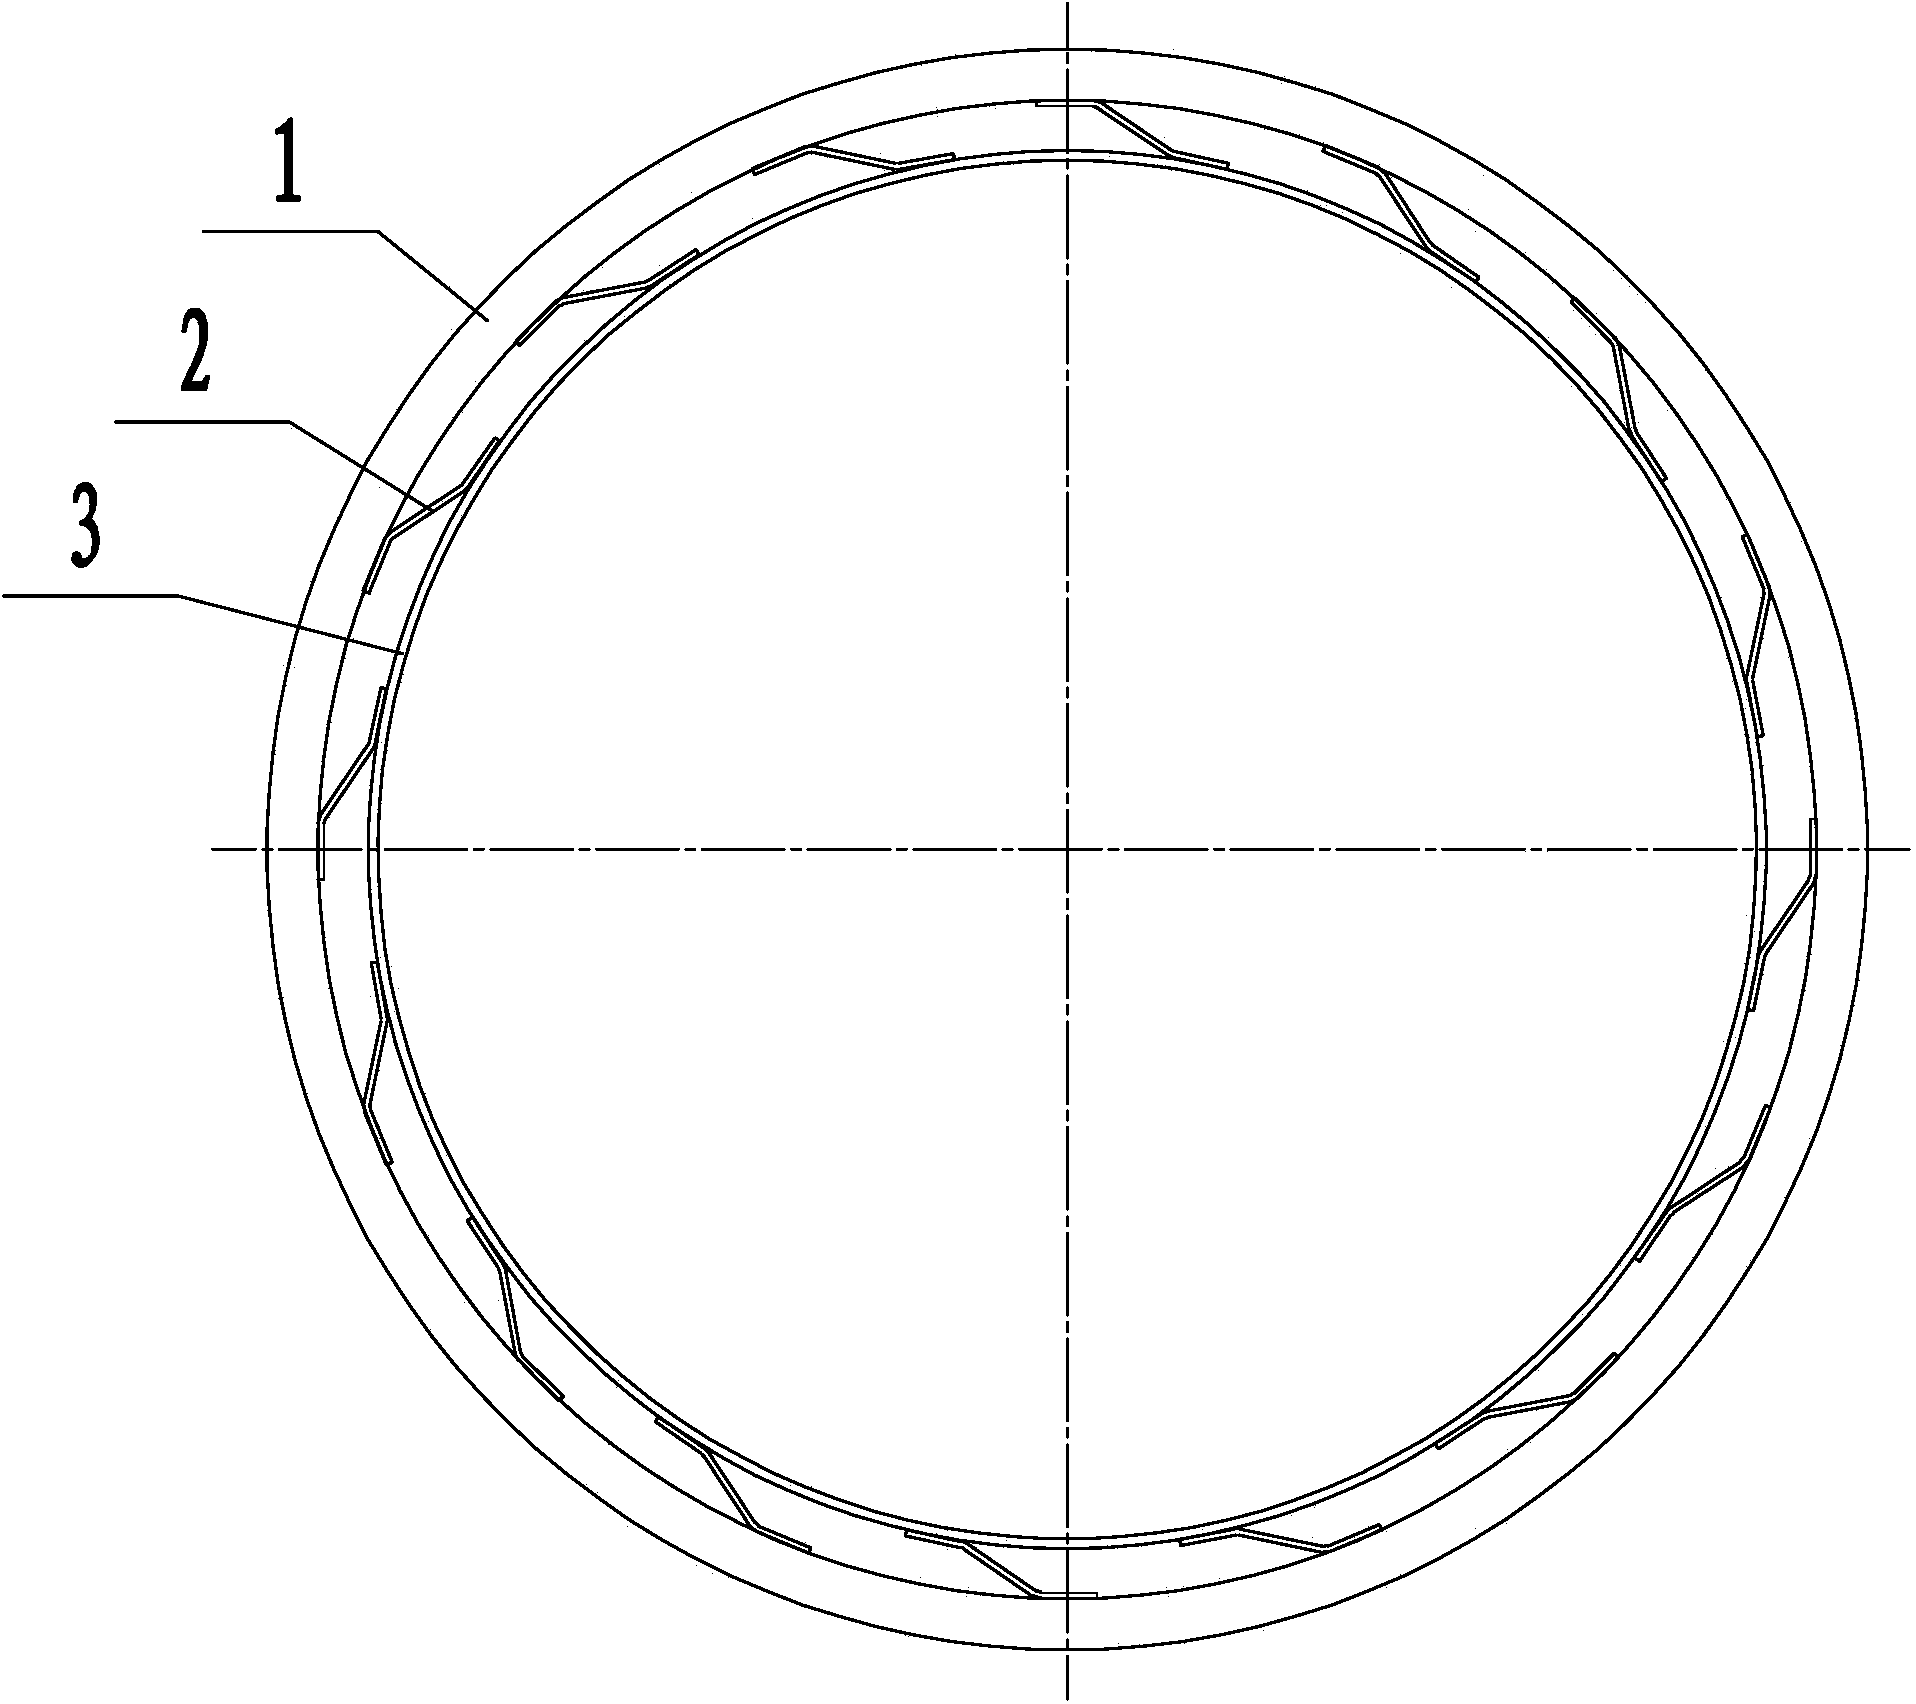 Elastic supporting structure of drying cylinder